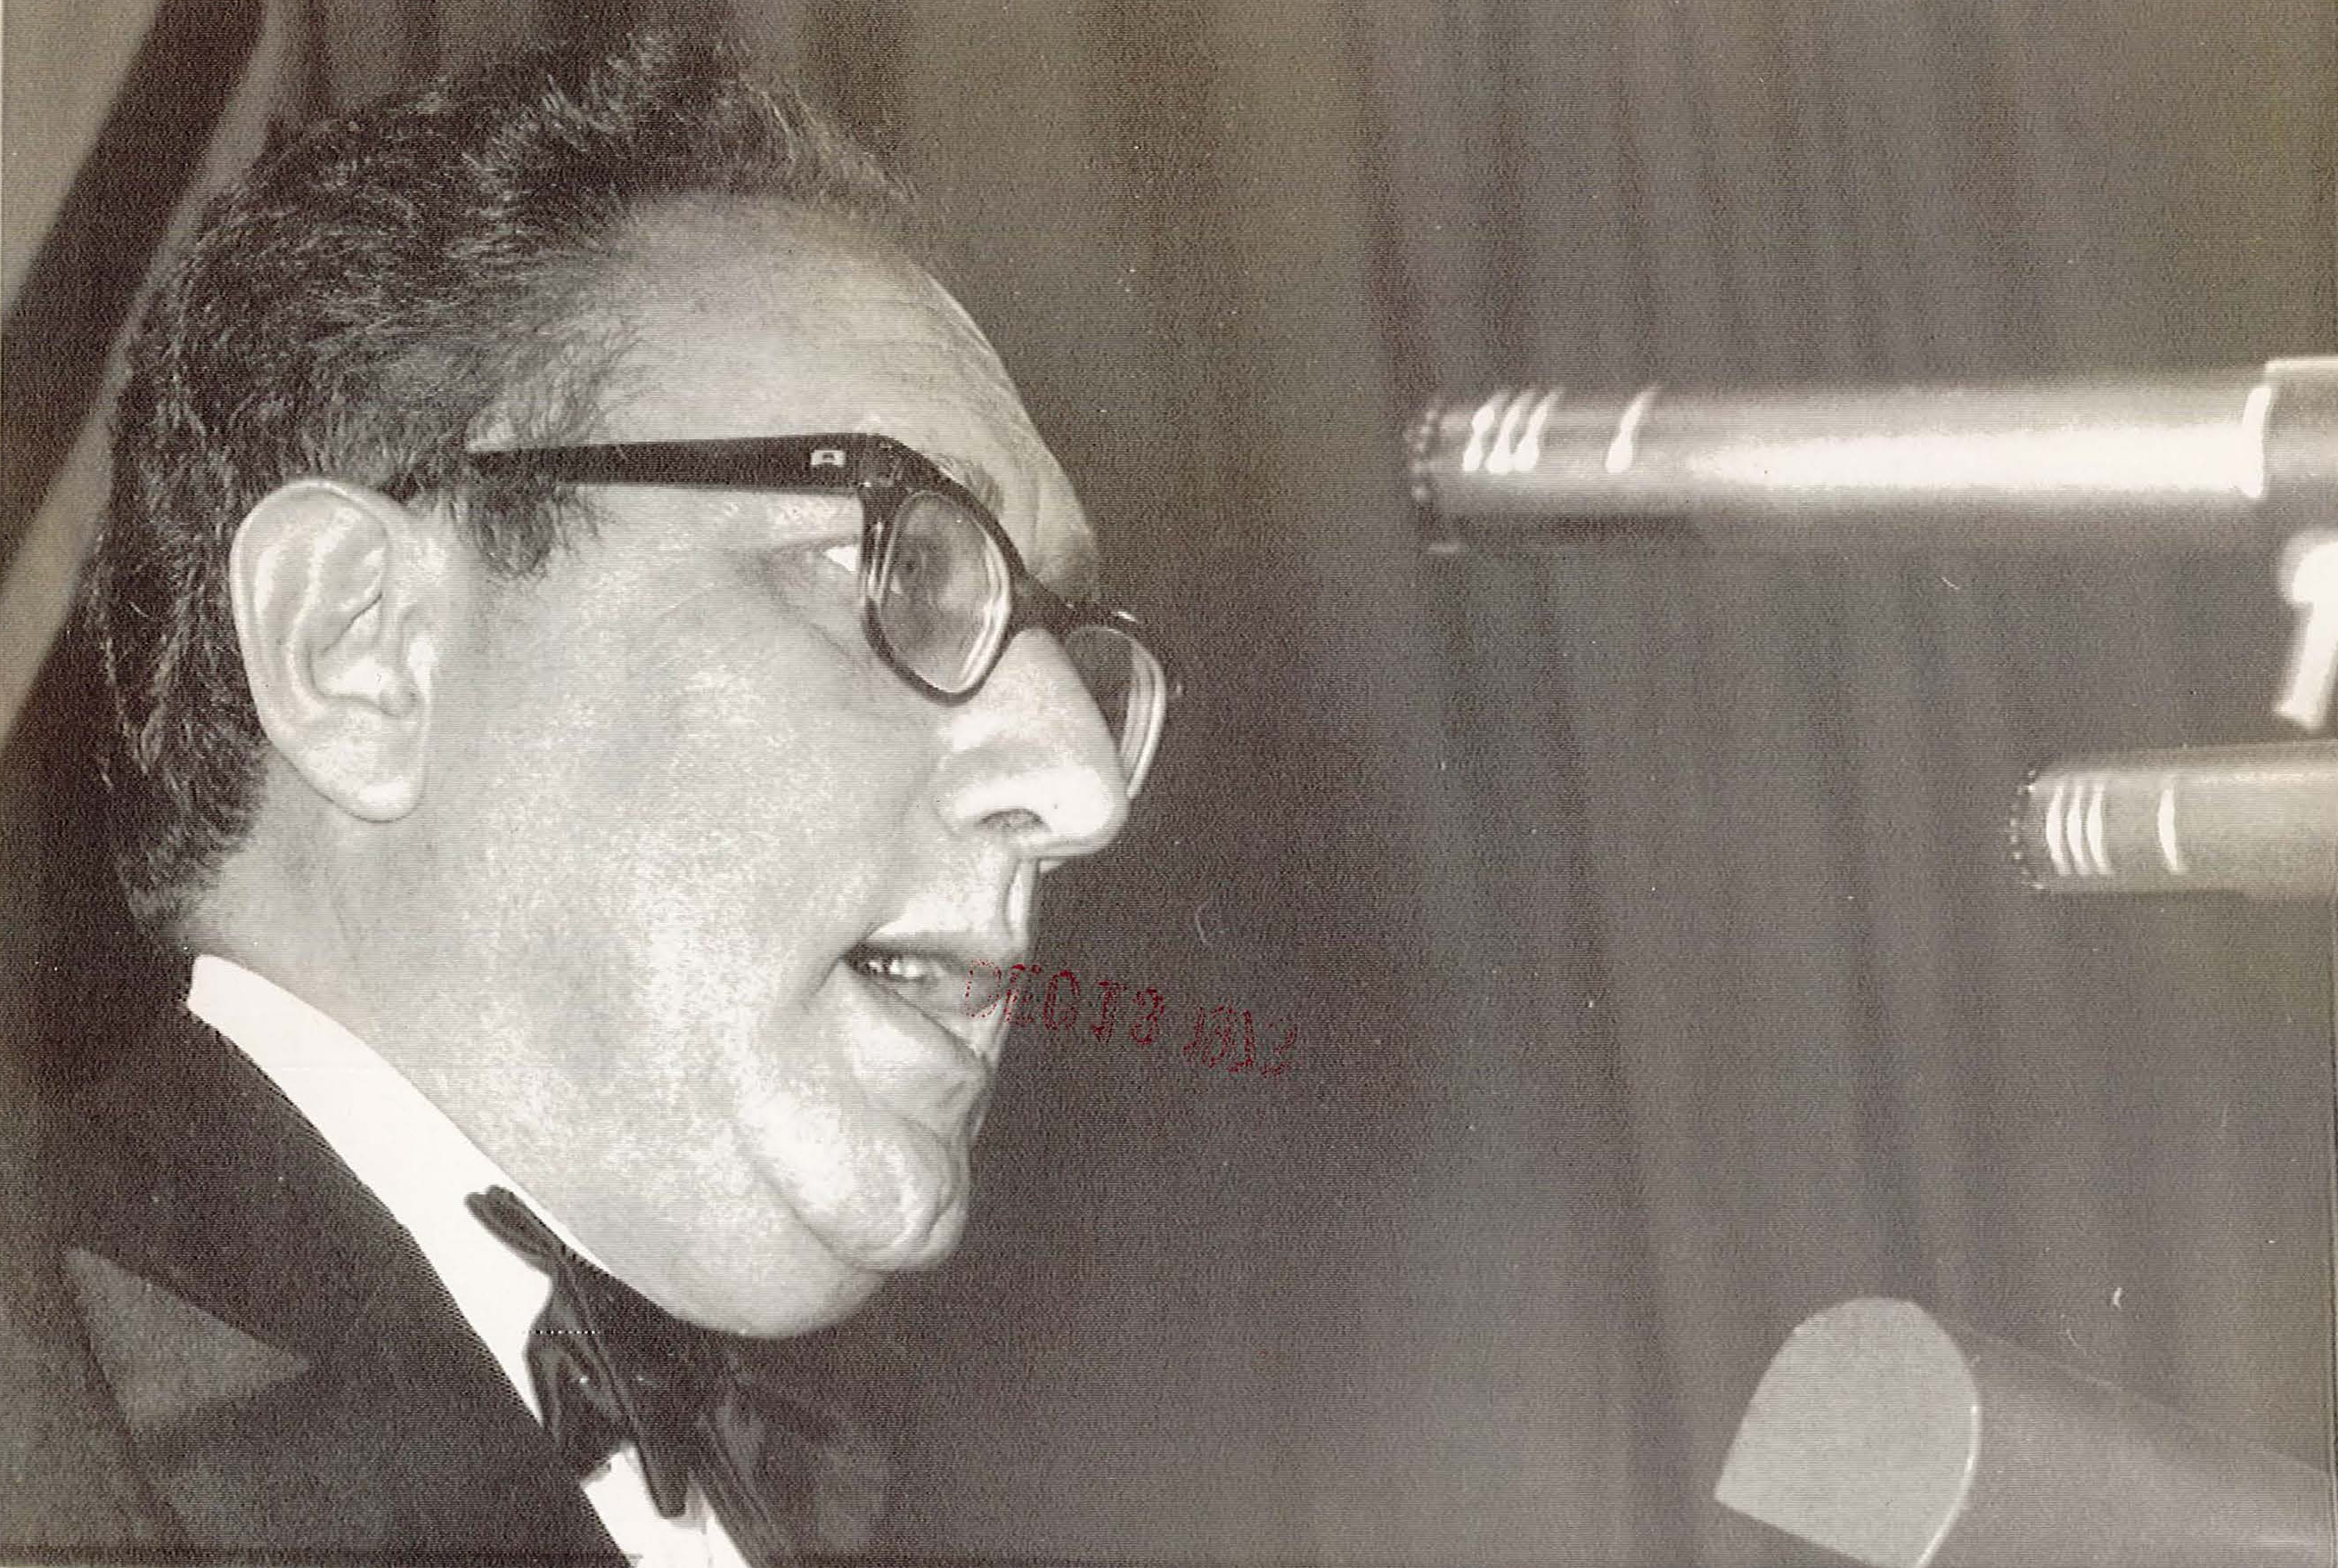 Henry A. Kissinger. (Dec. 12, 1973). PHOTO 1: U.S. Secretary of State delivers major oil crisis speech to the Pilgrims Society at the London Europa Hotel. AP Wirephoto.